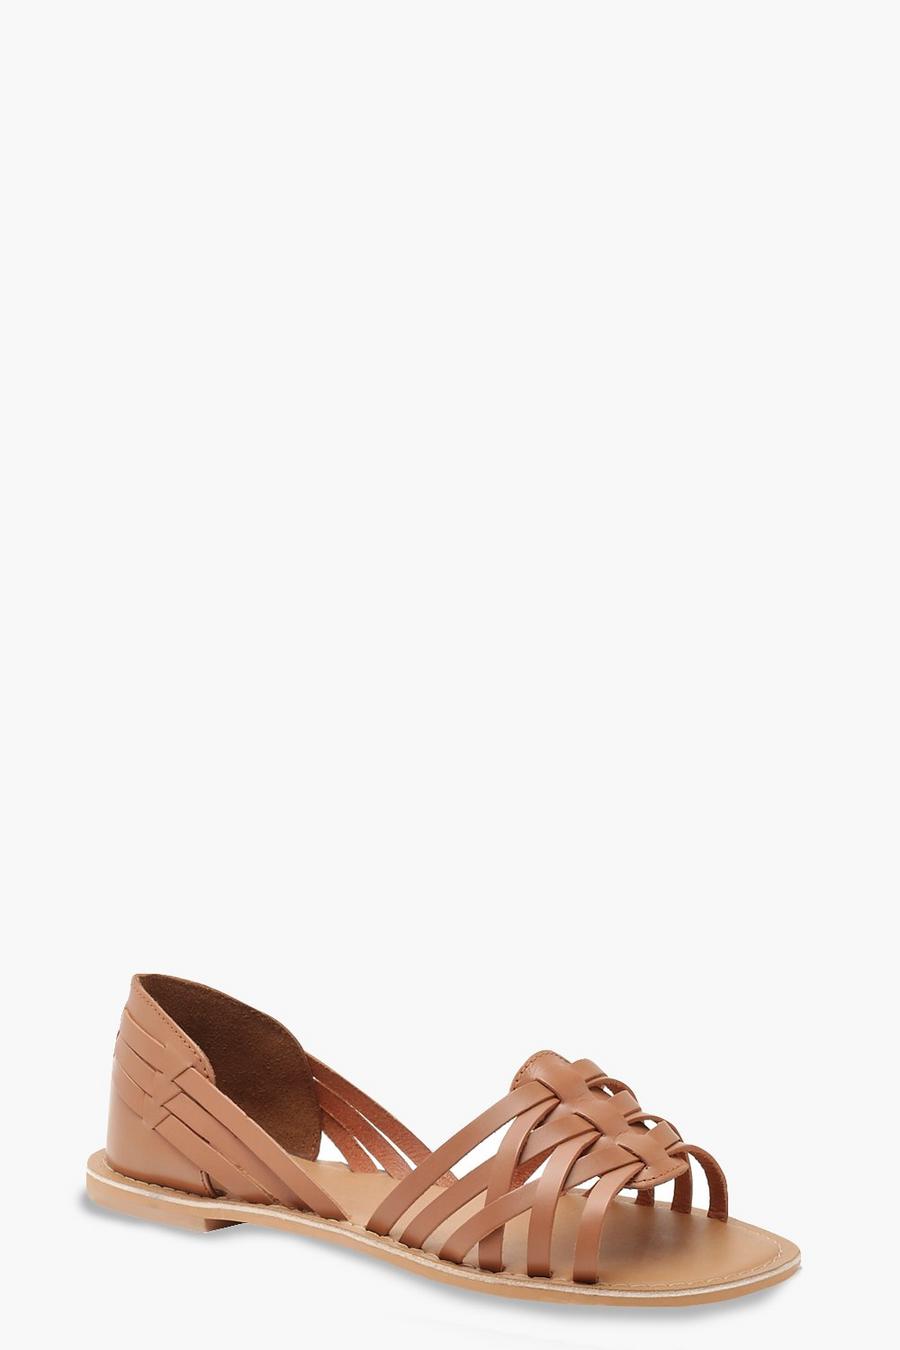 Tan Wide Fit Woven Leather Ballet Flats